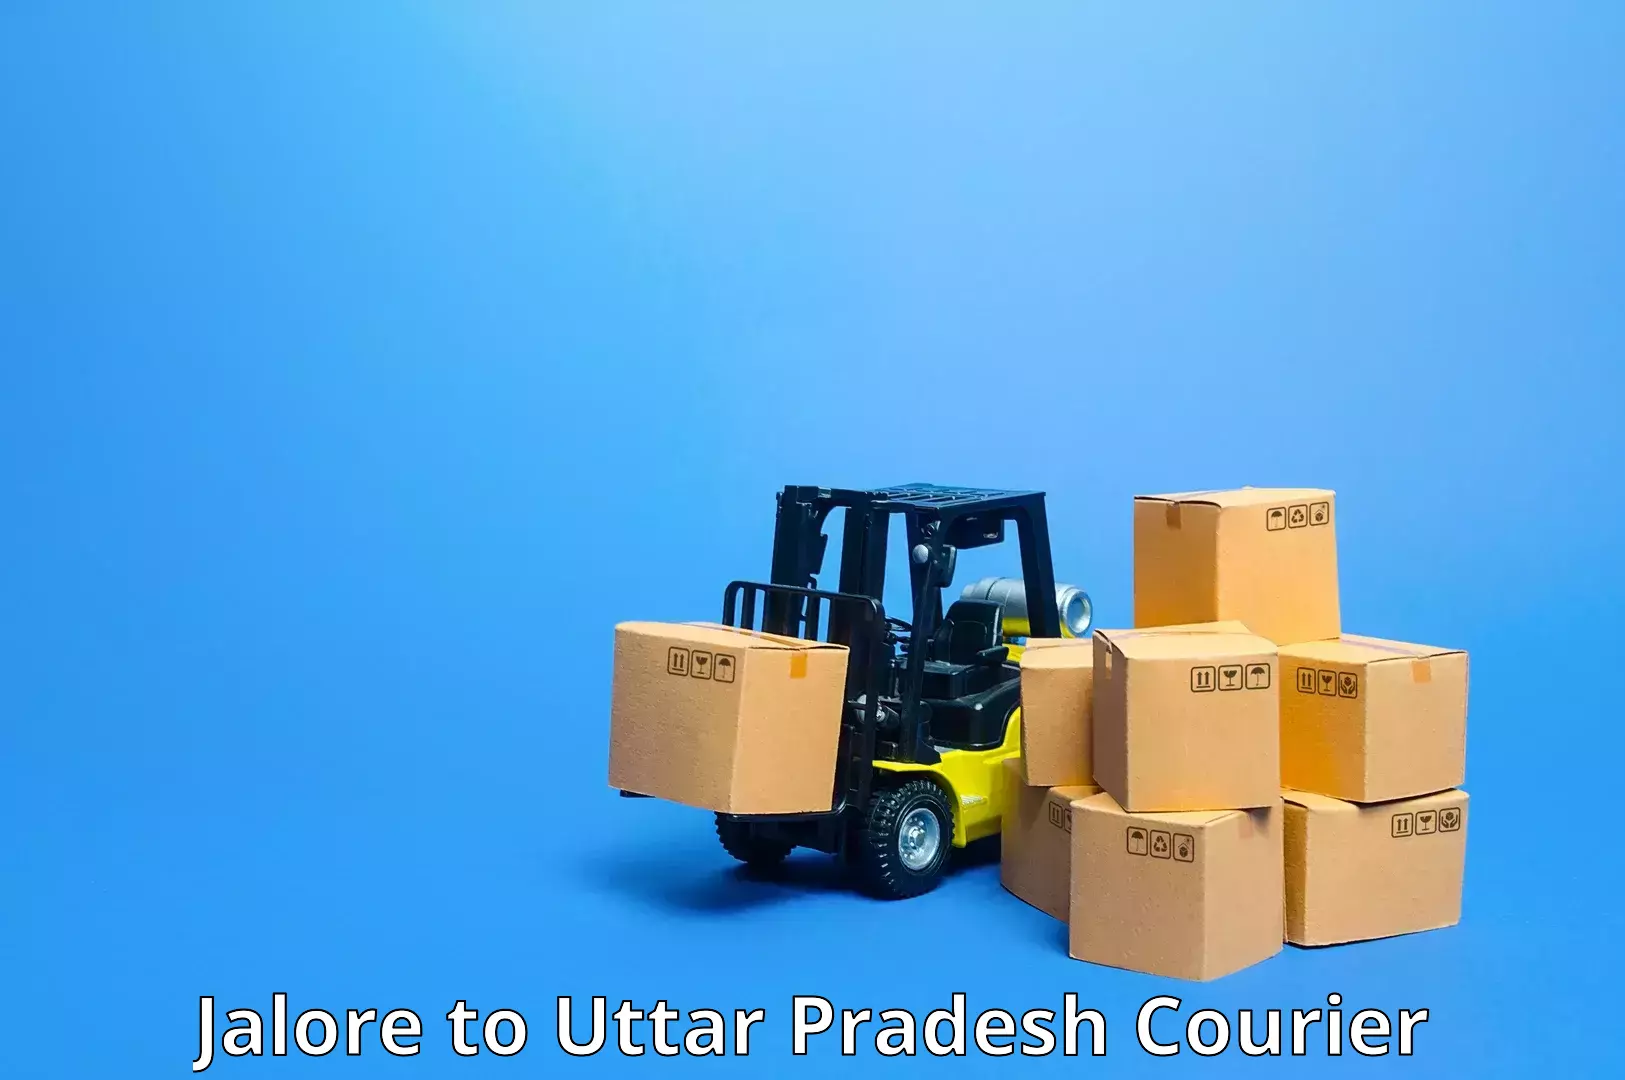 State-of-the-art courier technology Jalore to Meerut